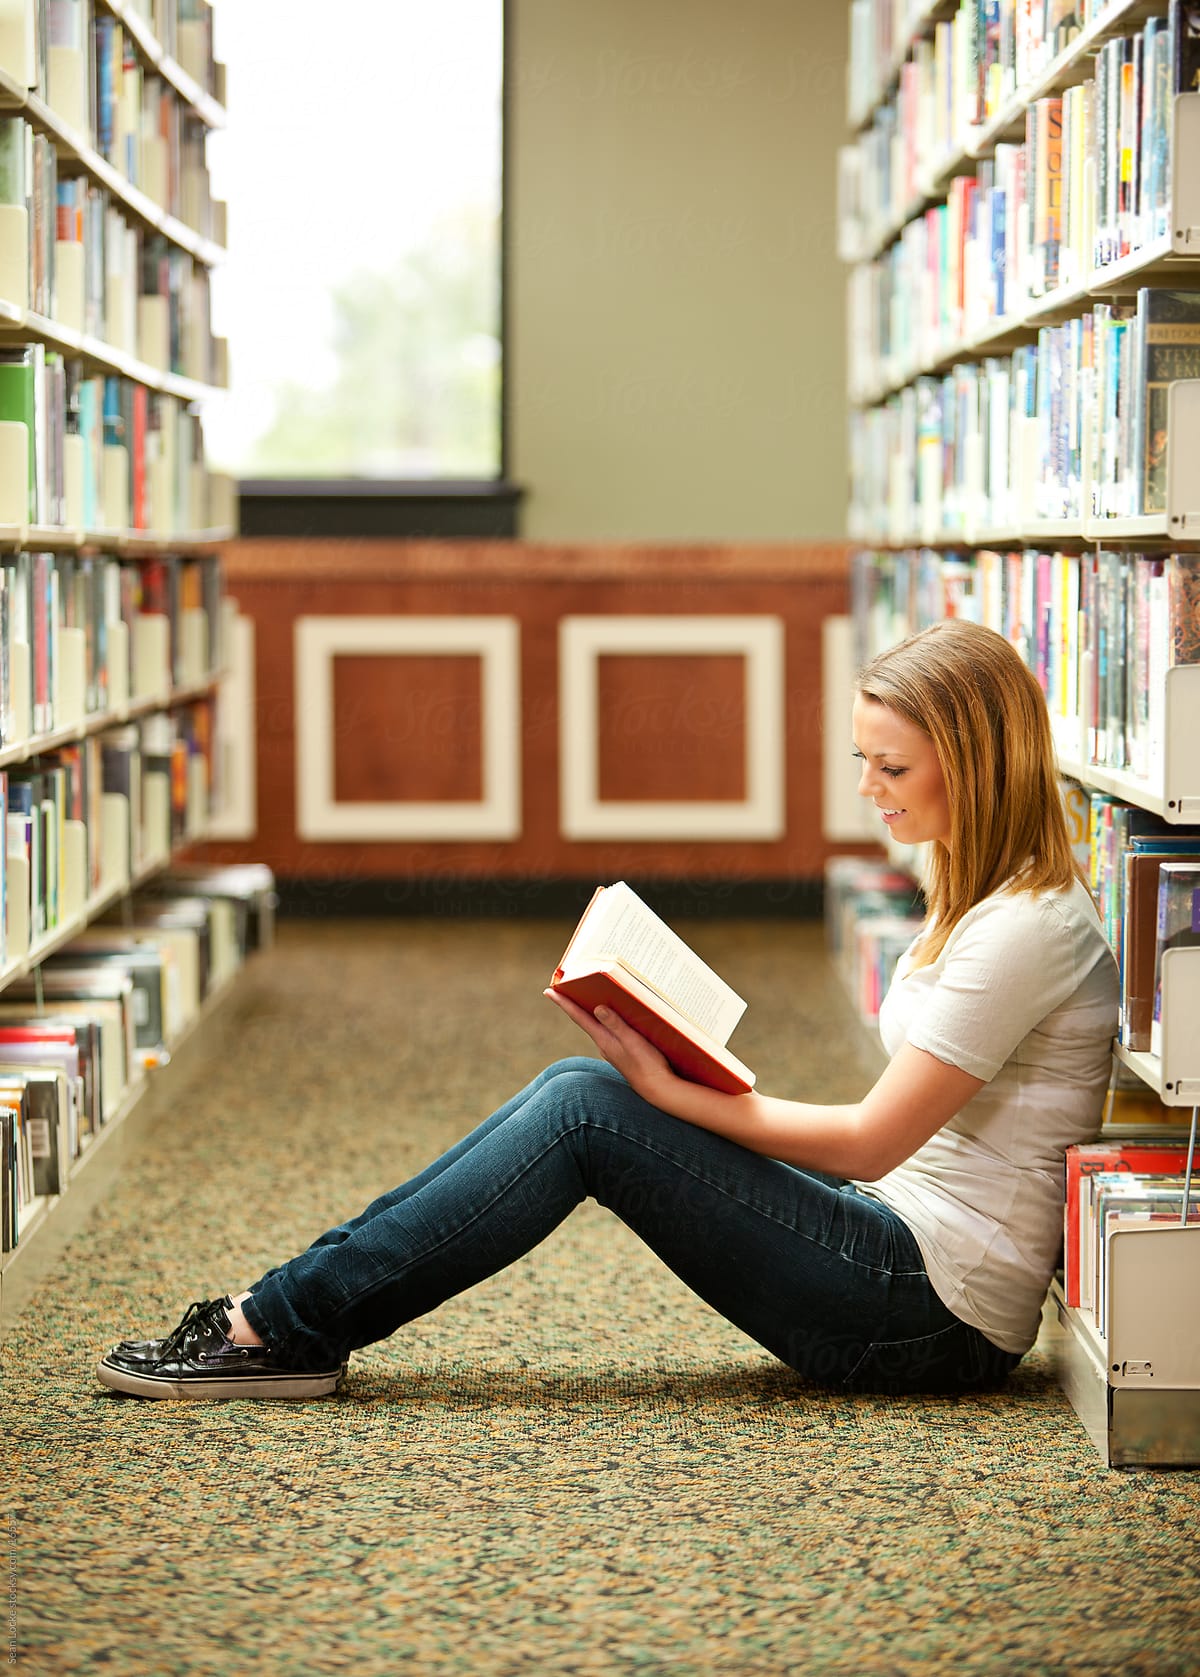 Library: Girl Sitting on Floor, Reading a Book